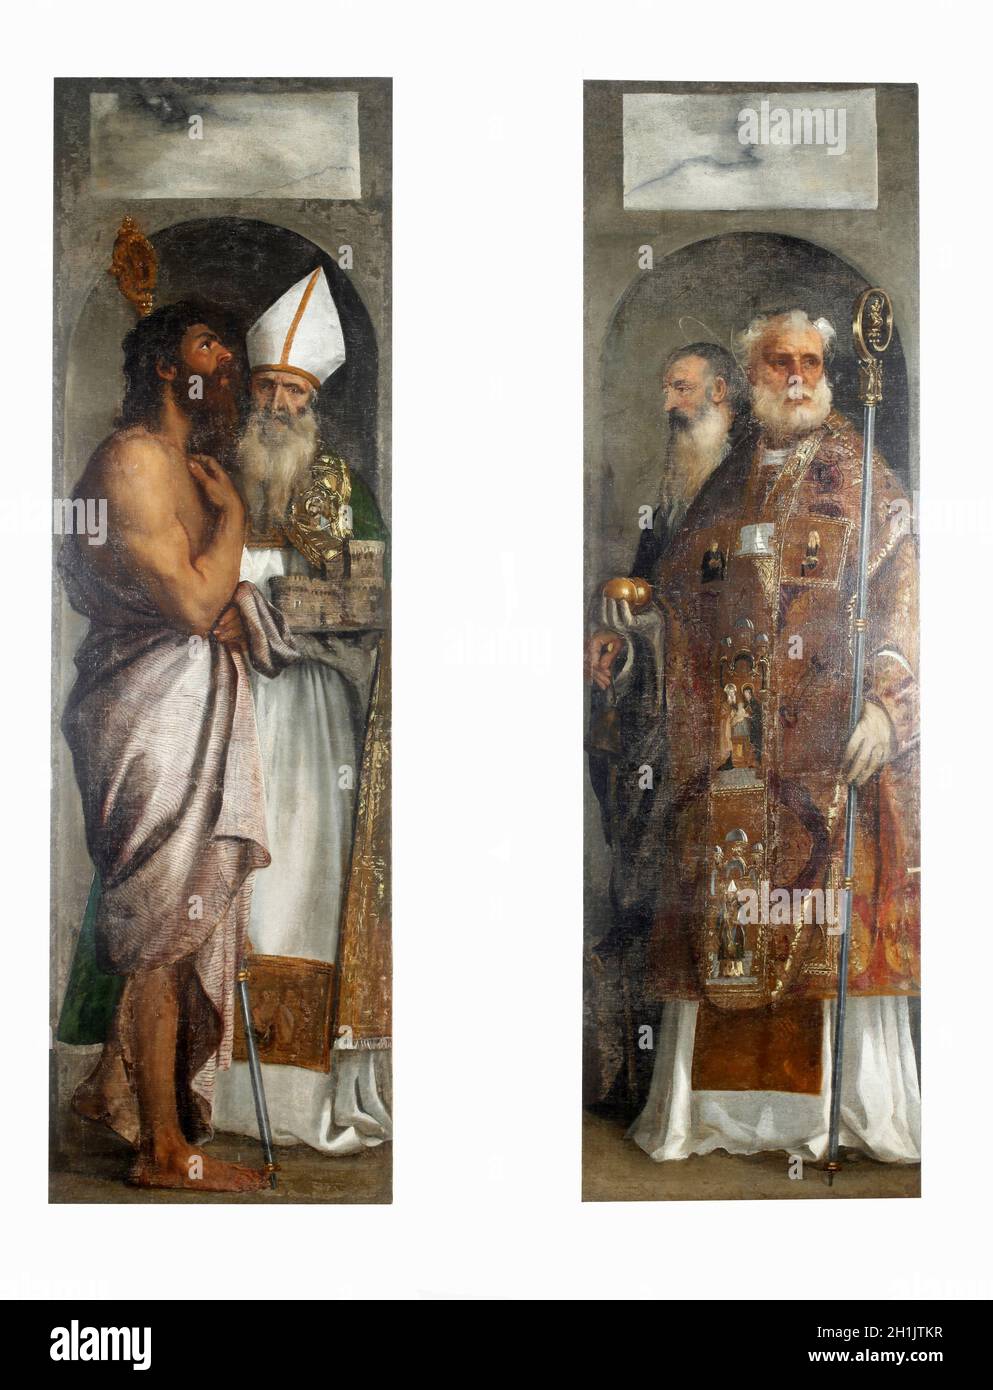 Tiziano Vecellio: St. Lazarus, St. Blaise, St. Nicholas and St. Anthony, Altarpiece in Dubrovnik Cathedral, Croatia Stock Photo